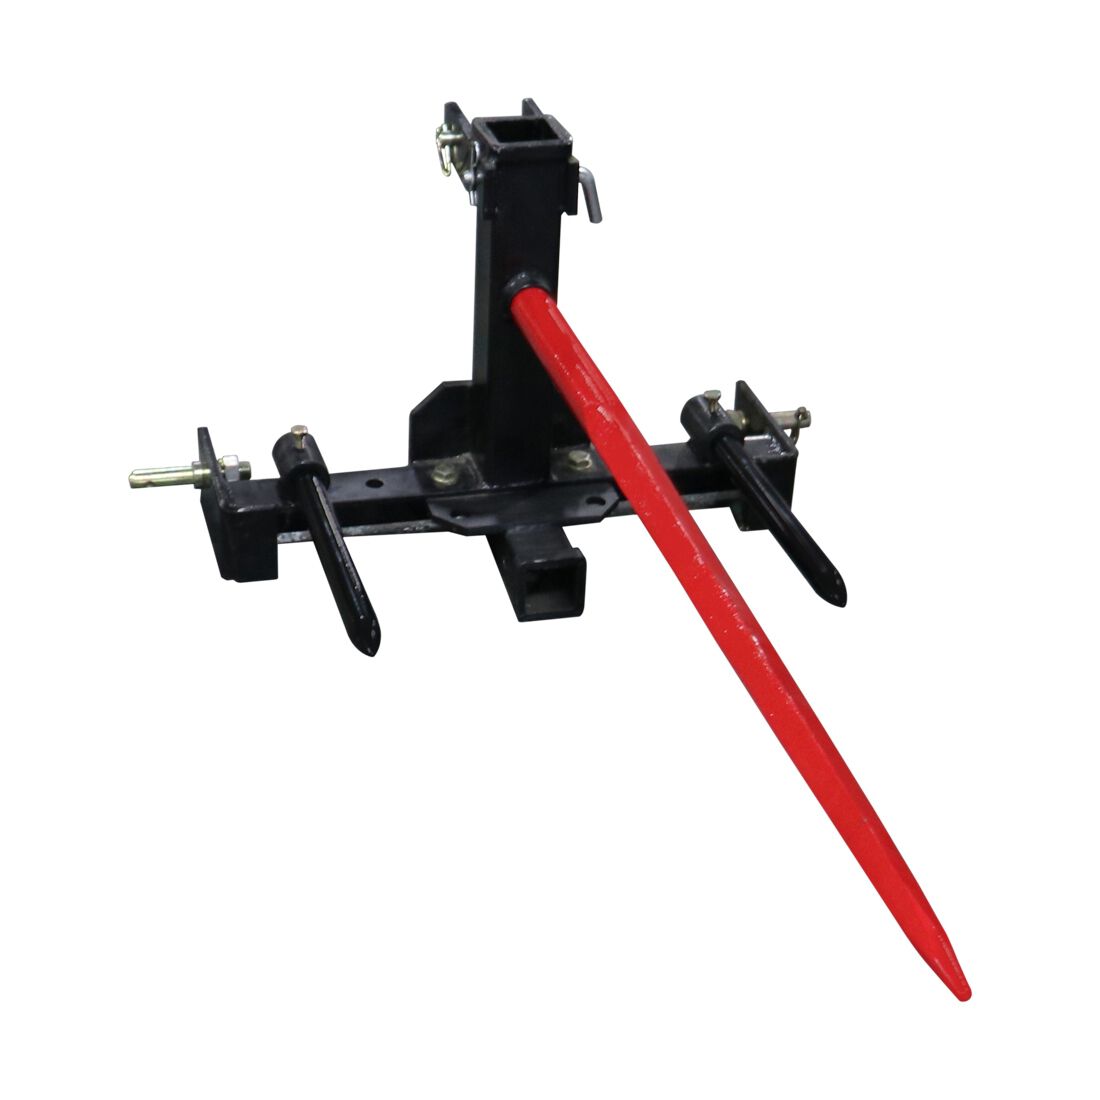 3 Point Category 1 Titan Distributors Inc Transformer Tractor Hitch with Hay Spears for Moving Hay Bales 